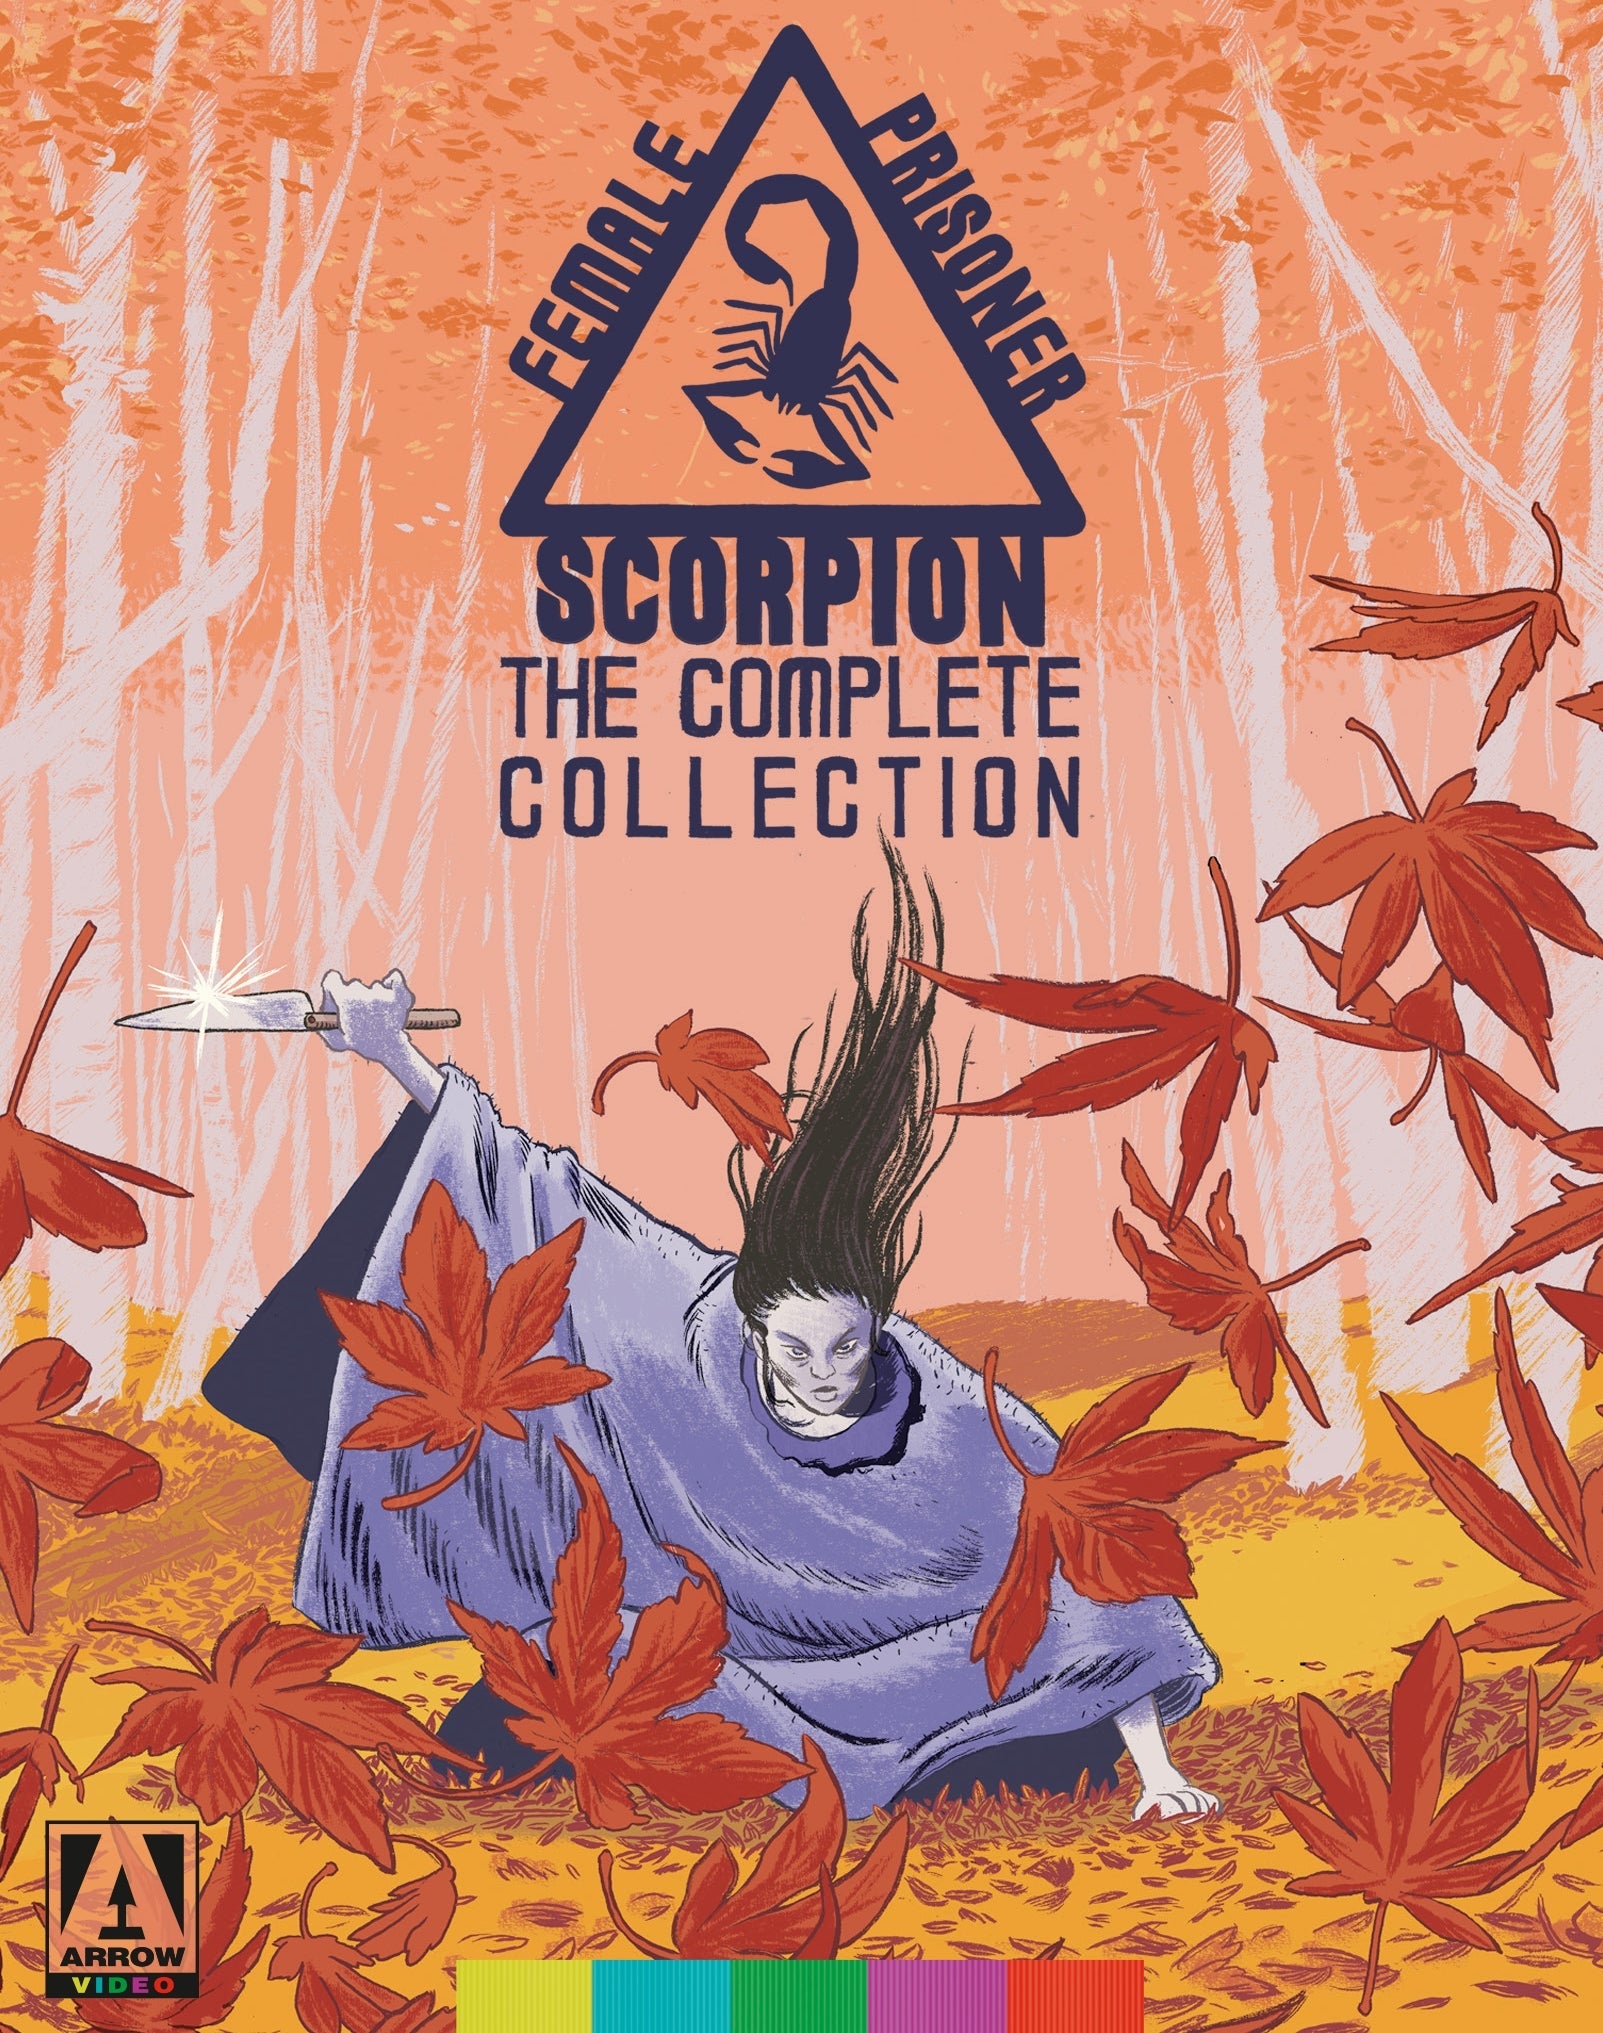 Female Prisoner Scorpion: The Complete Collection Blu-Ray Blu-Ray